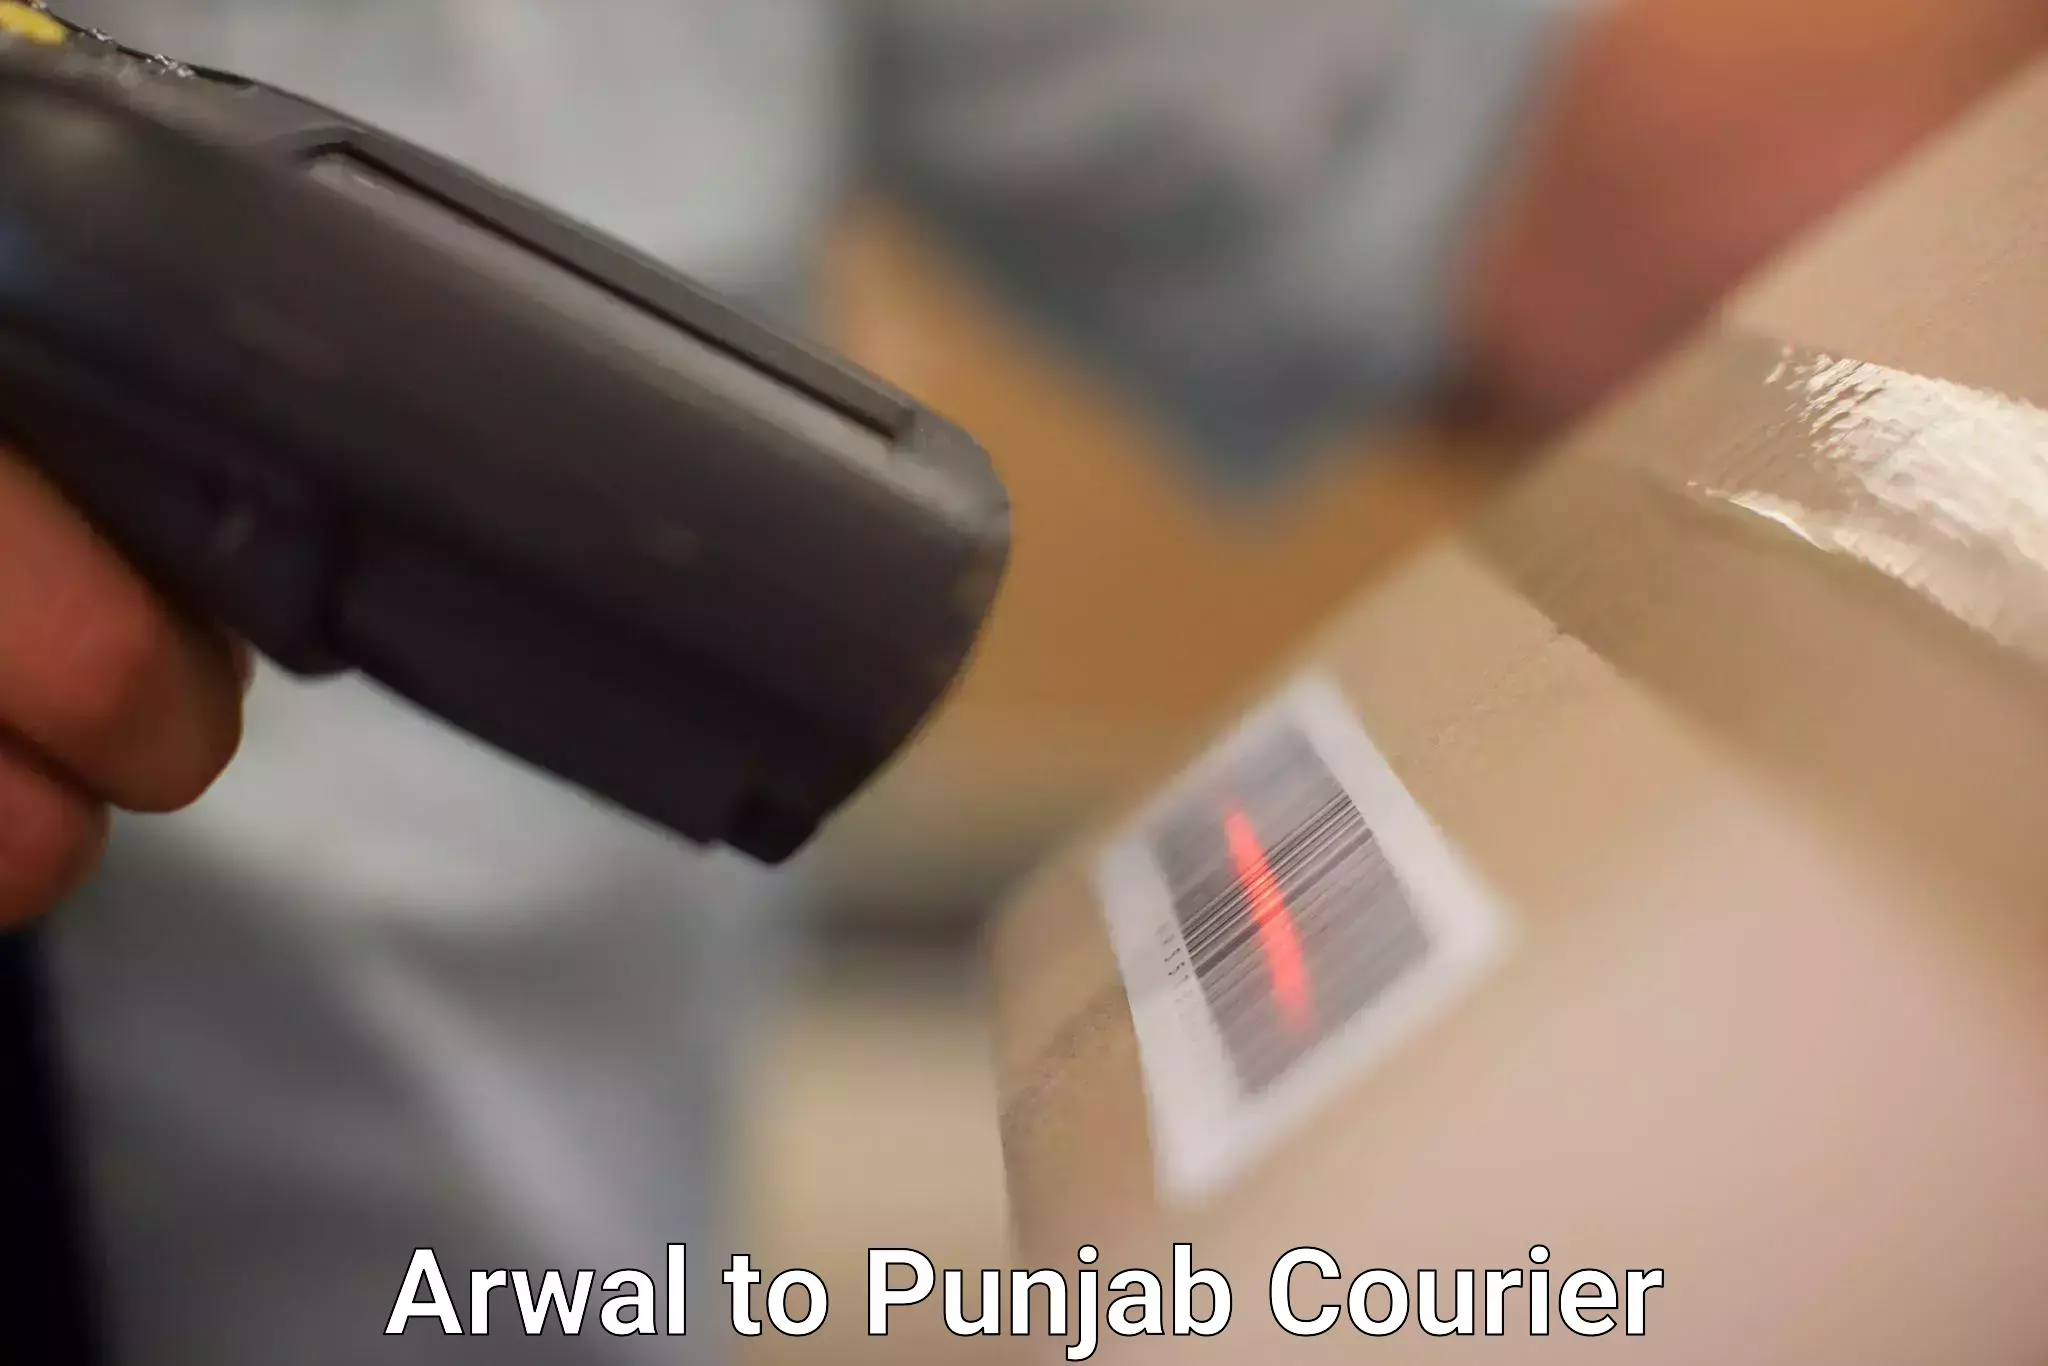 On-call courier service Arwal to Bathinda